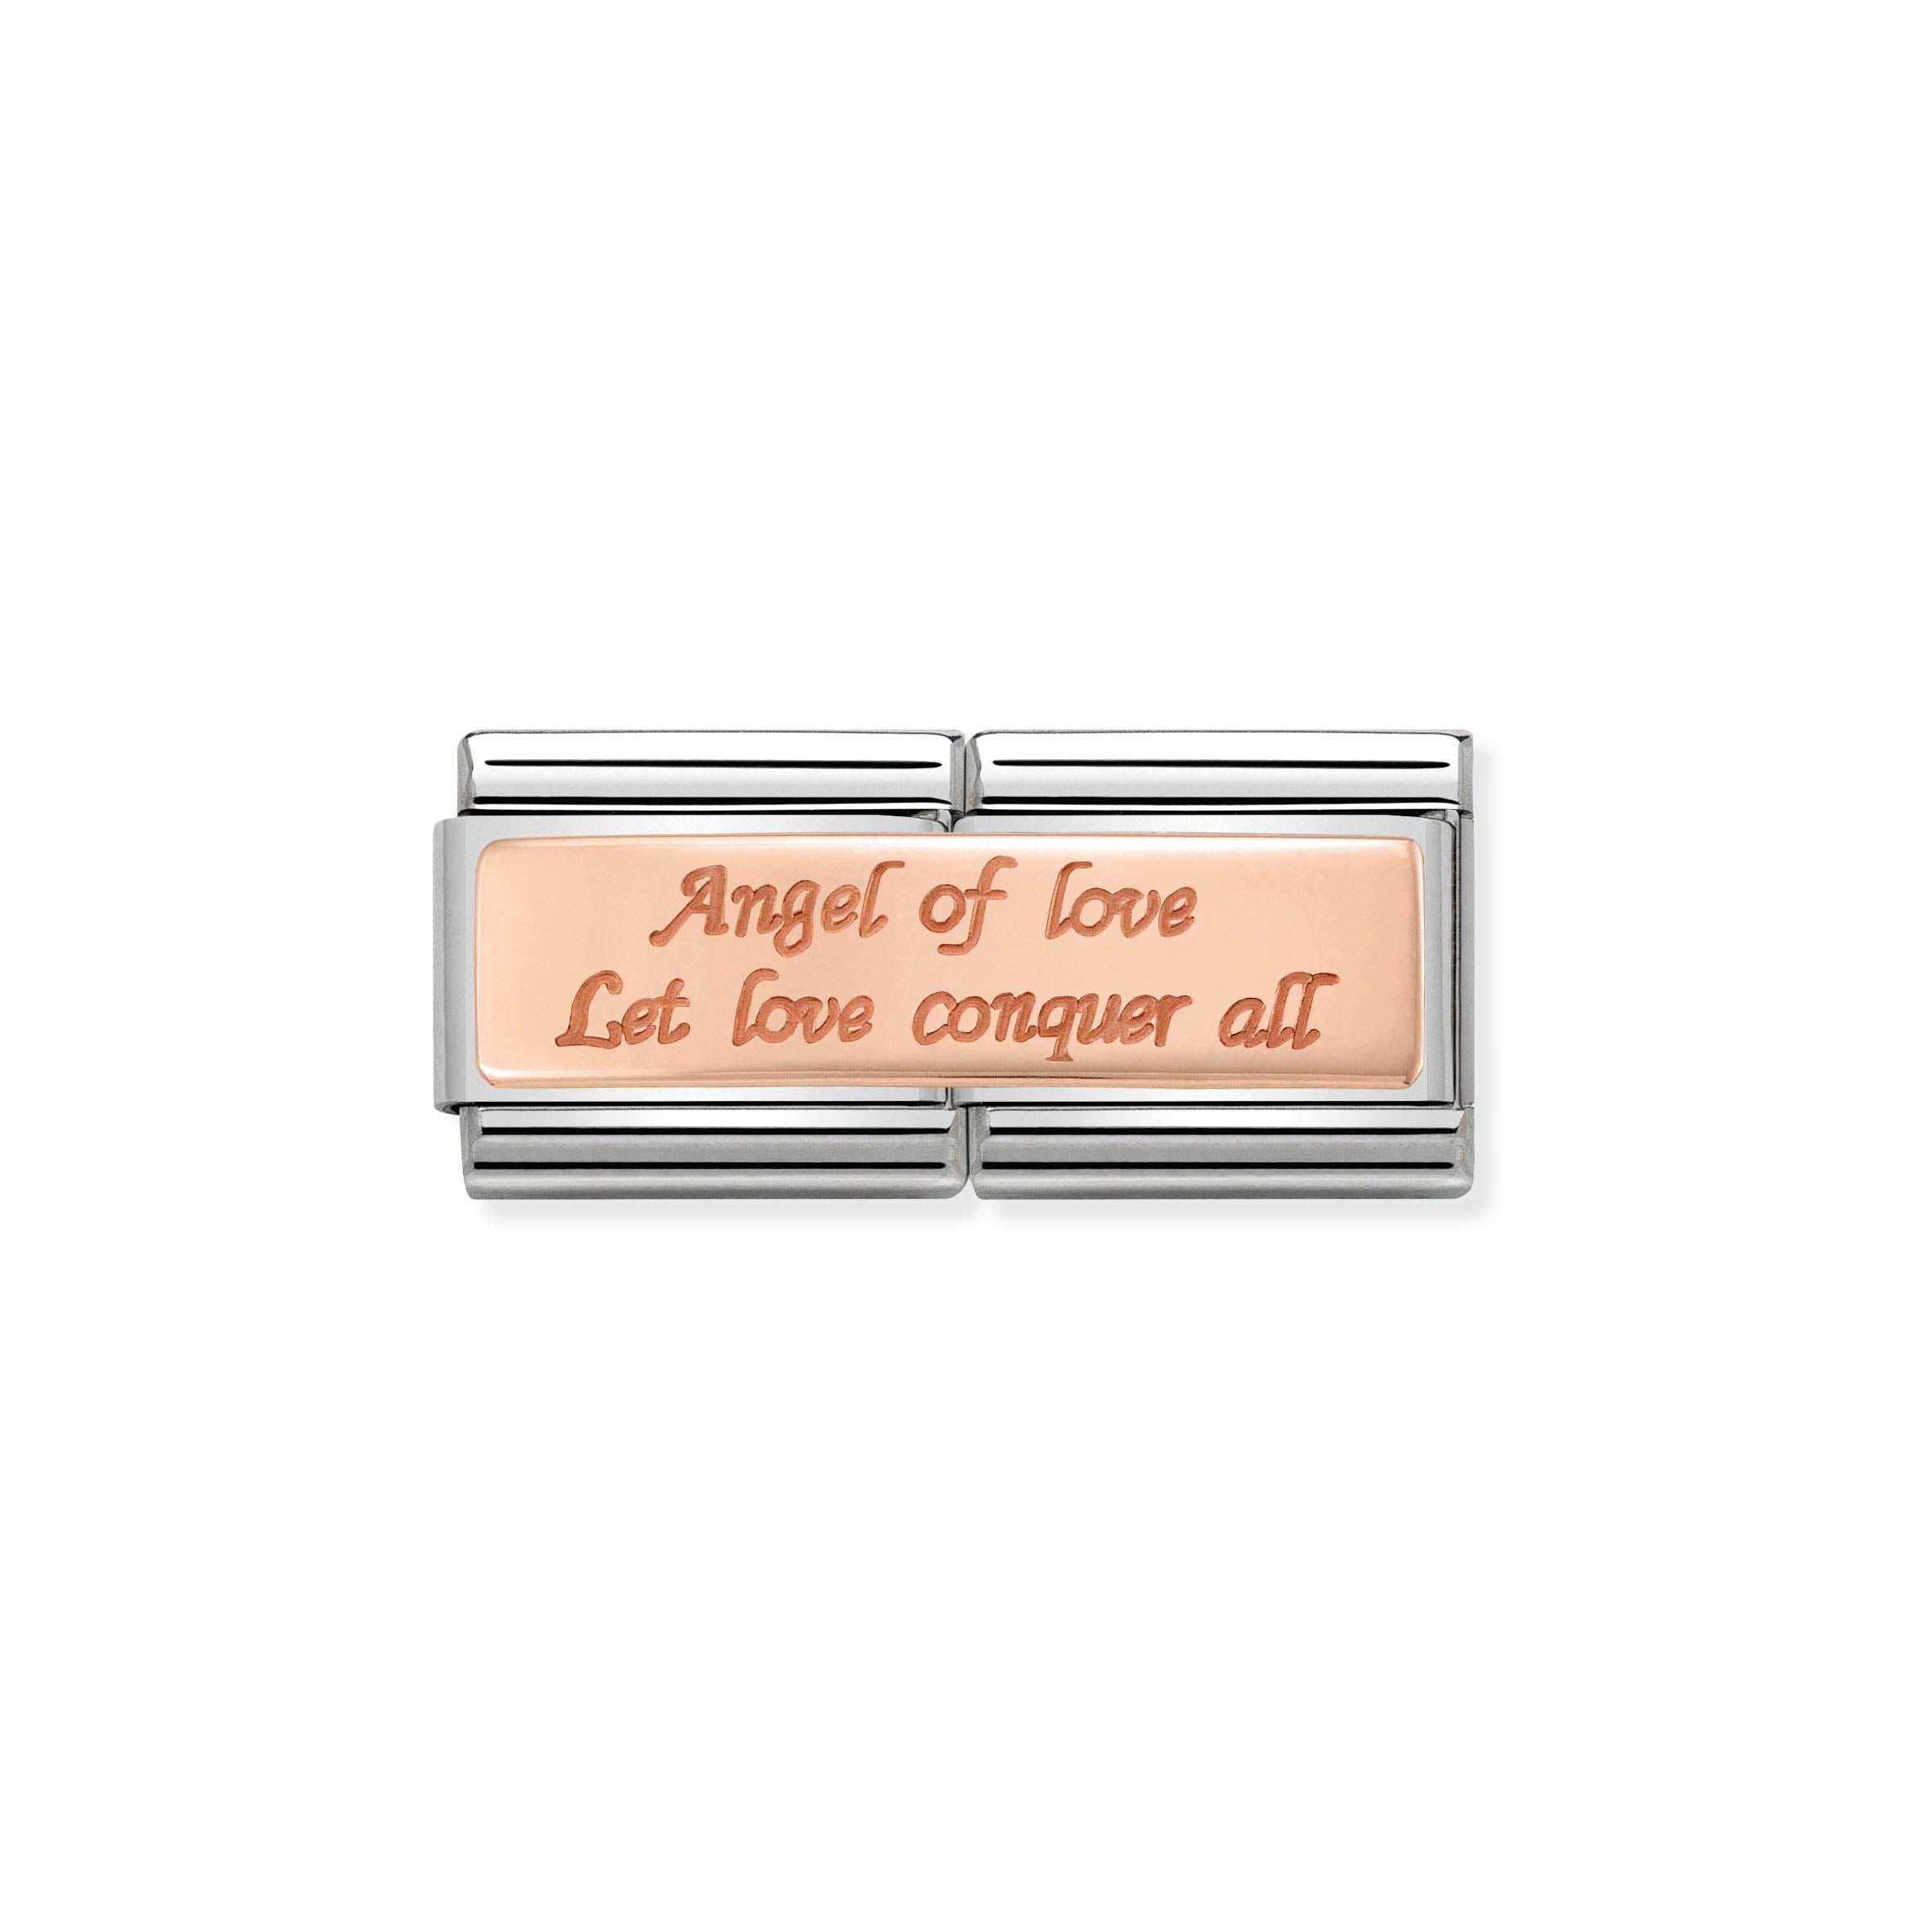 NOMINATION - ROSE GOLD DOUBLE ENGRAVED s/steel and rose gold (Angel of Love - conquer all)